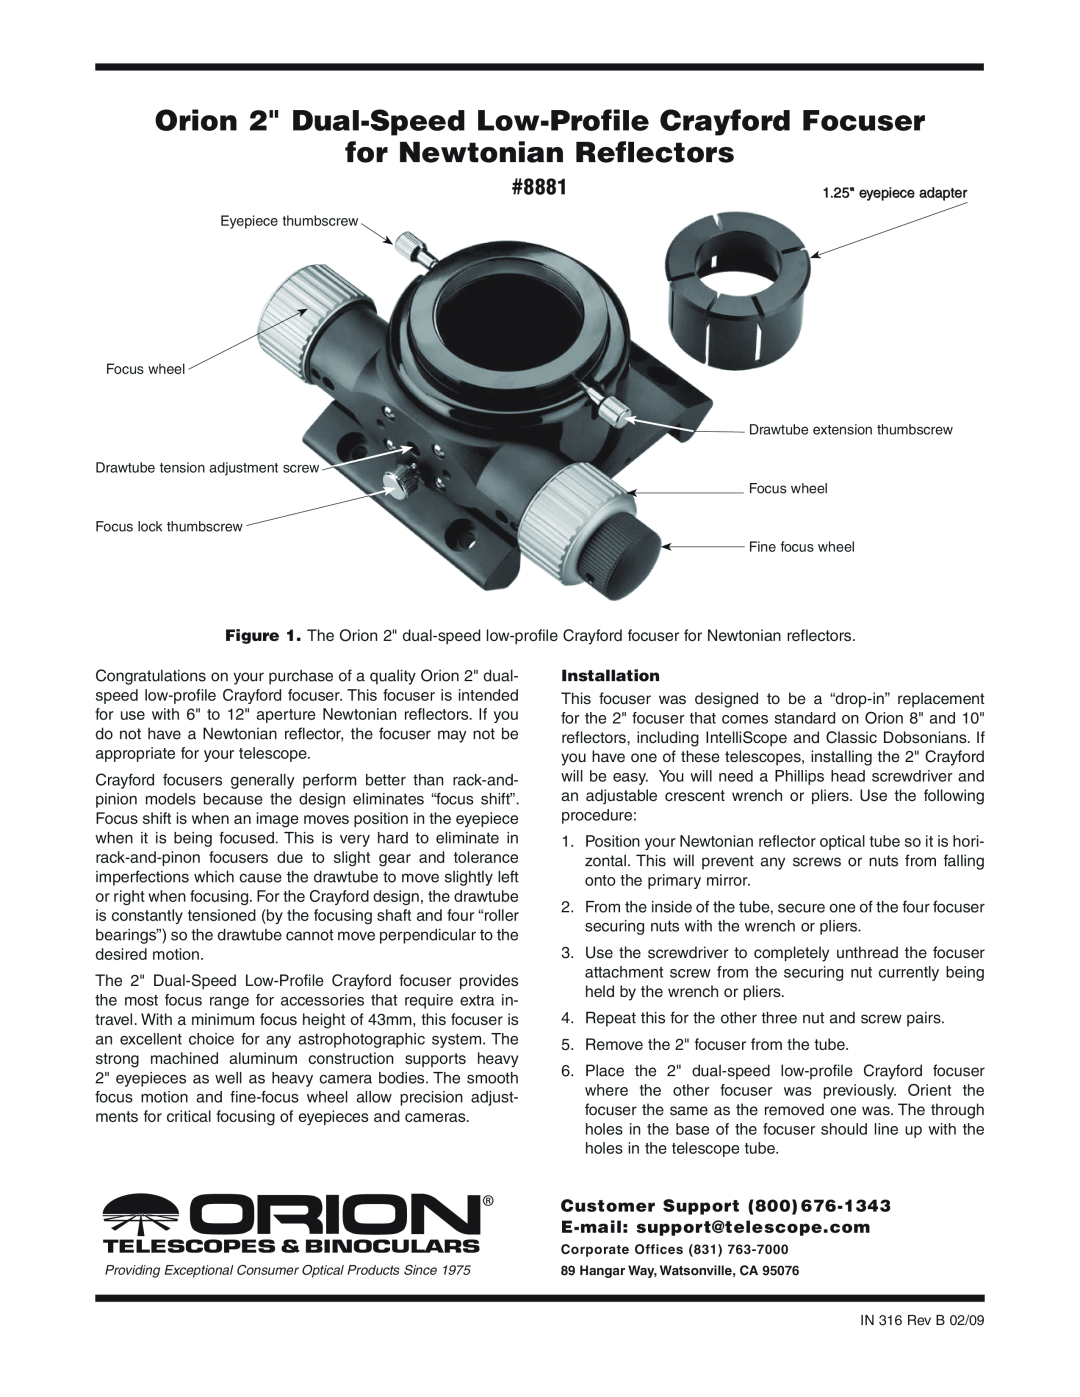 Orion manual Customer Support, E-mail support@telescope.com, Installation, for Newtonian Reflectors, #8881 